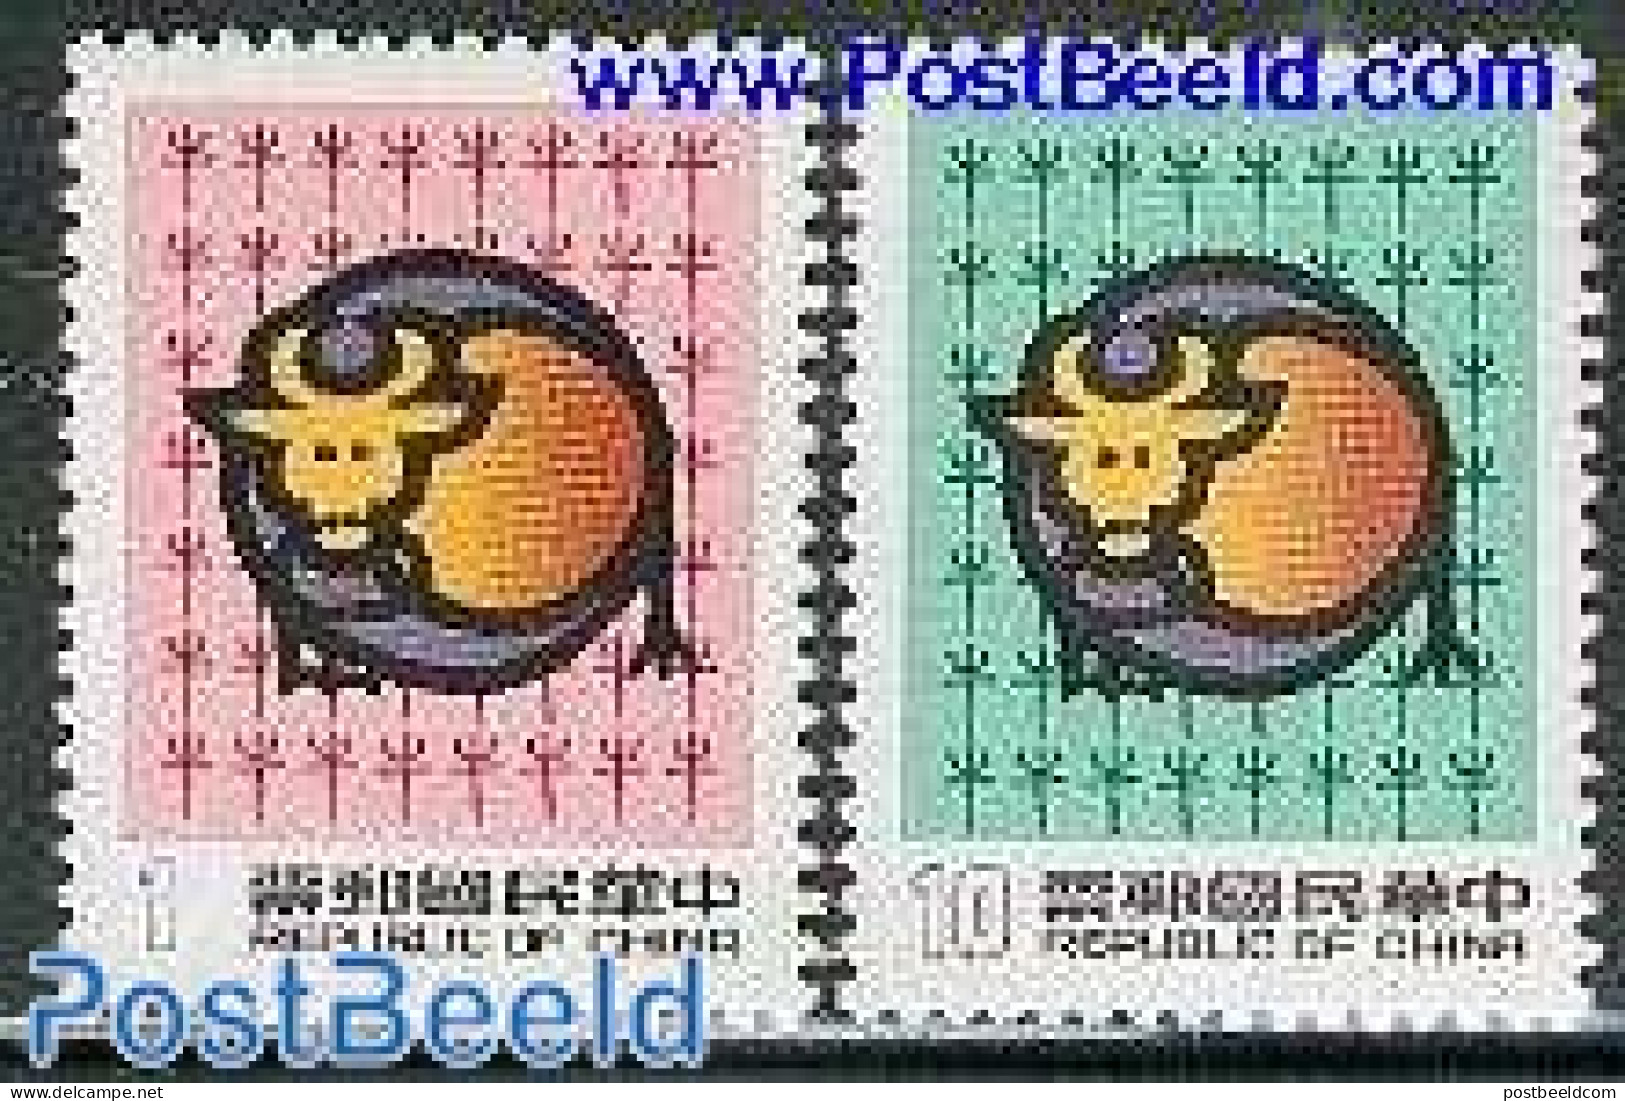 Taiwan 1984 Year Of The Ox 2v, Mint NH, Various - New Year - New Year